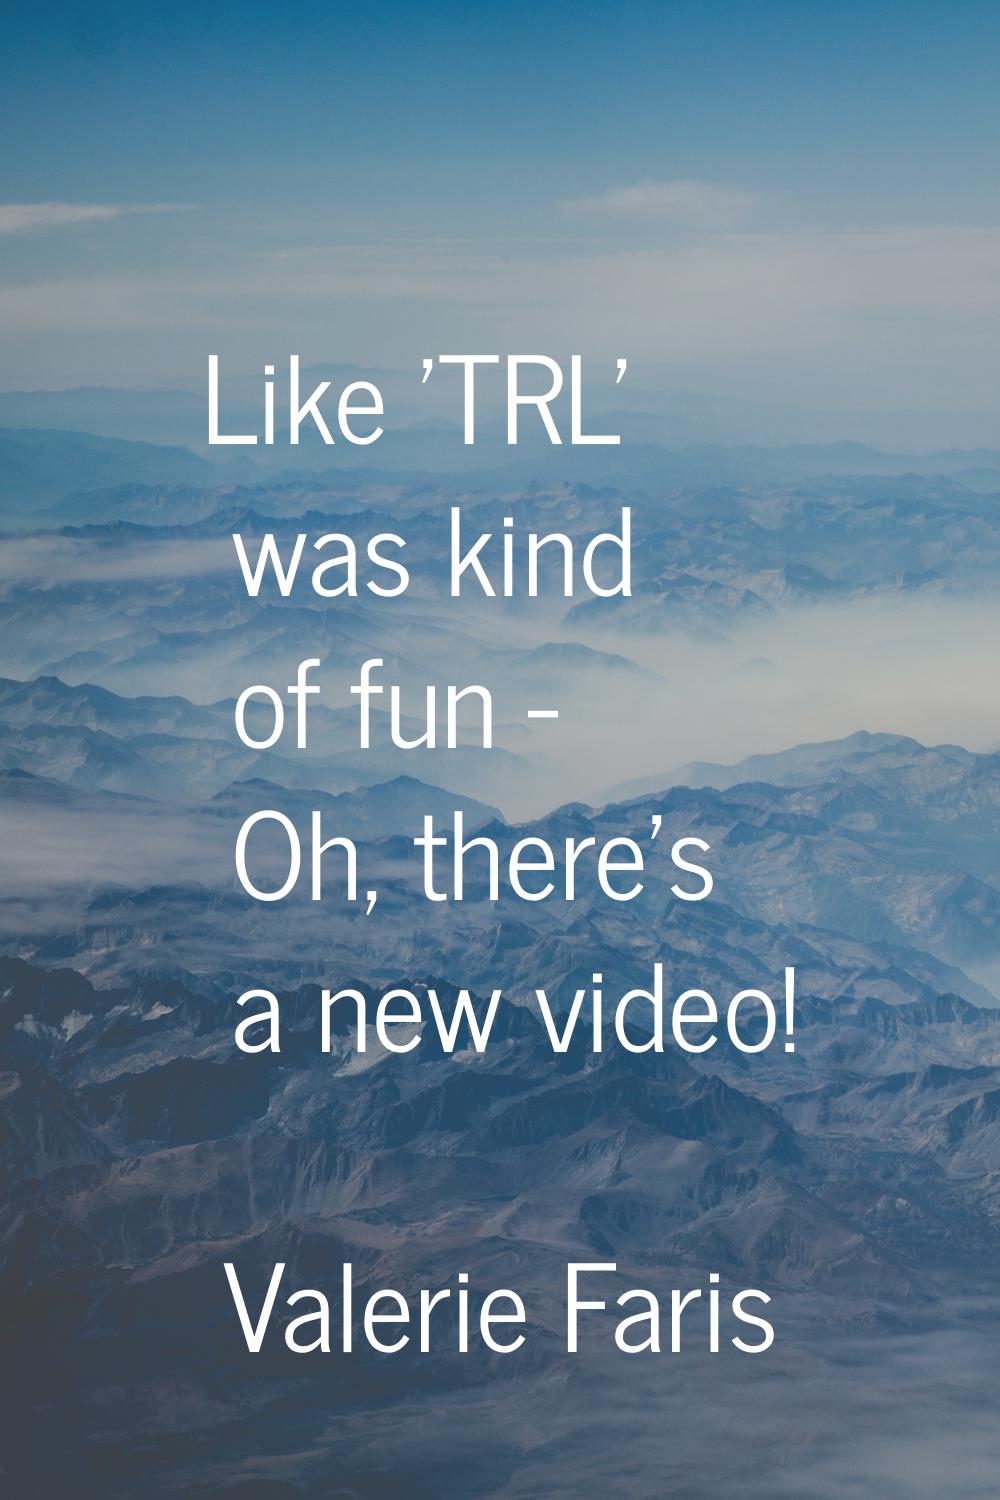 Like 'TRL' was kind of fun - Oh, there's a new video!